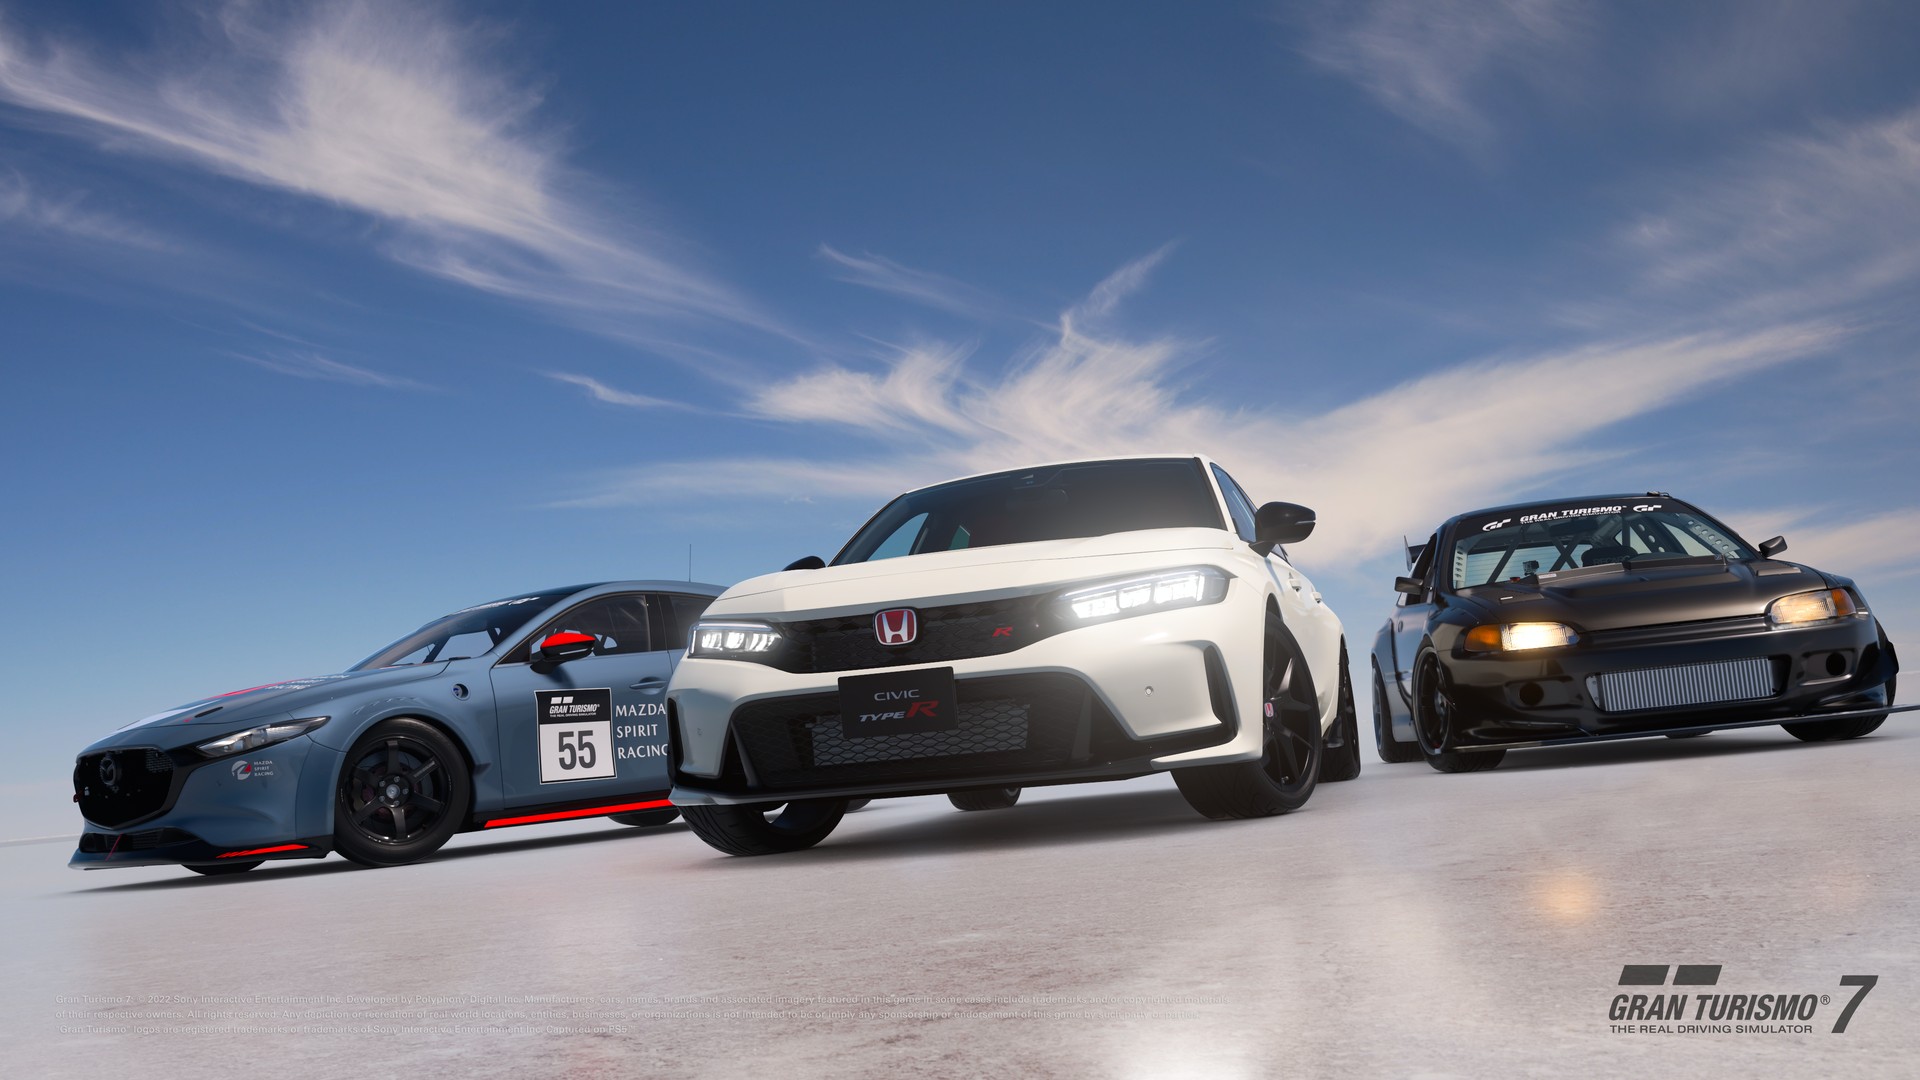 Introducing the 'Gran Turismo 7' September Update: Adding 3 New